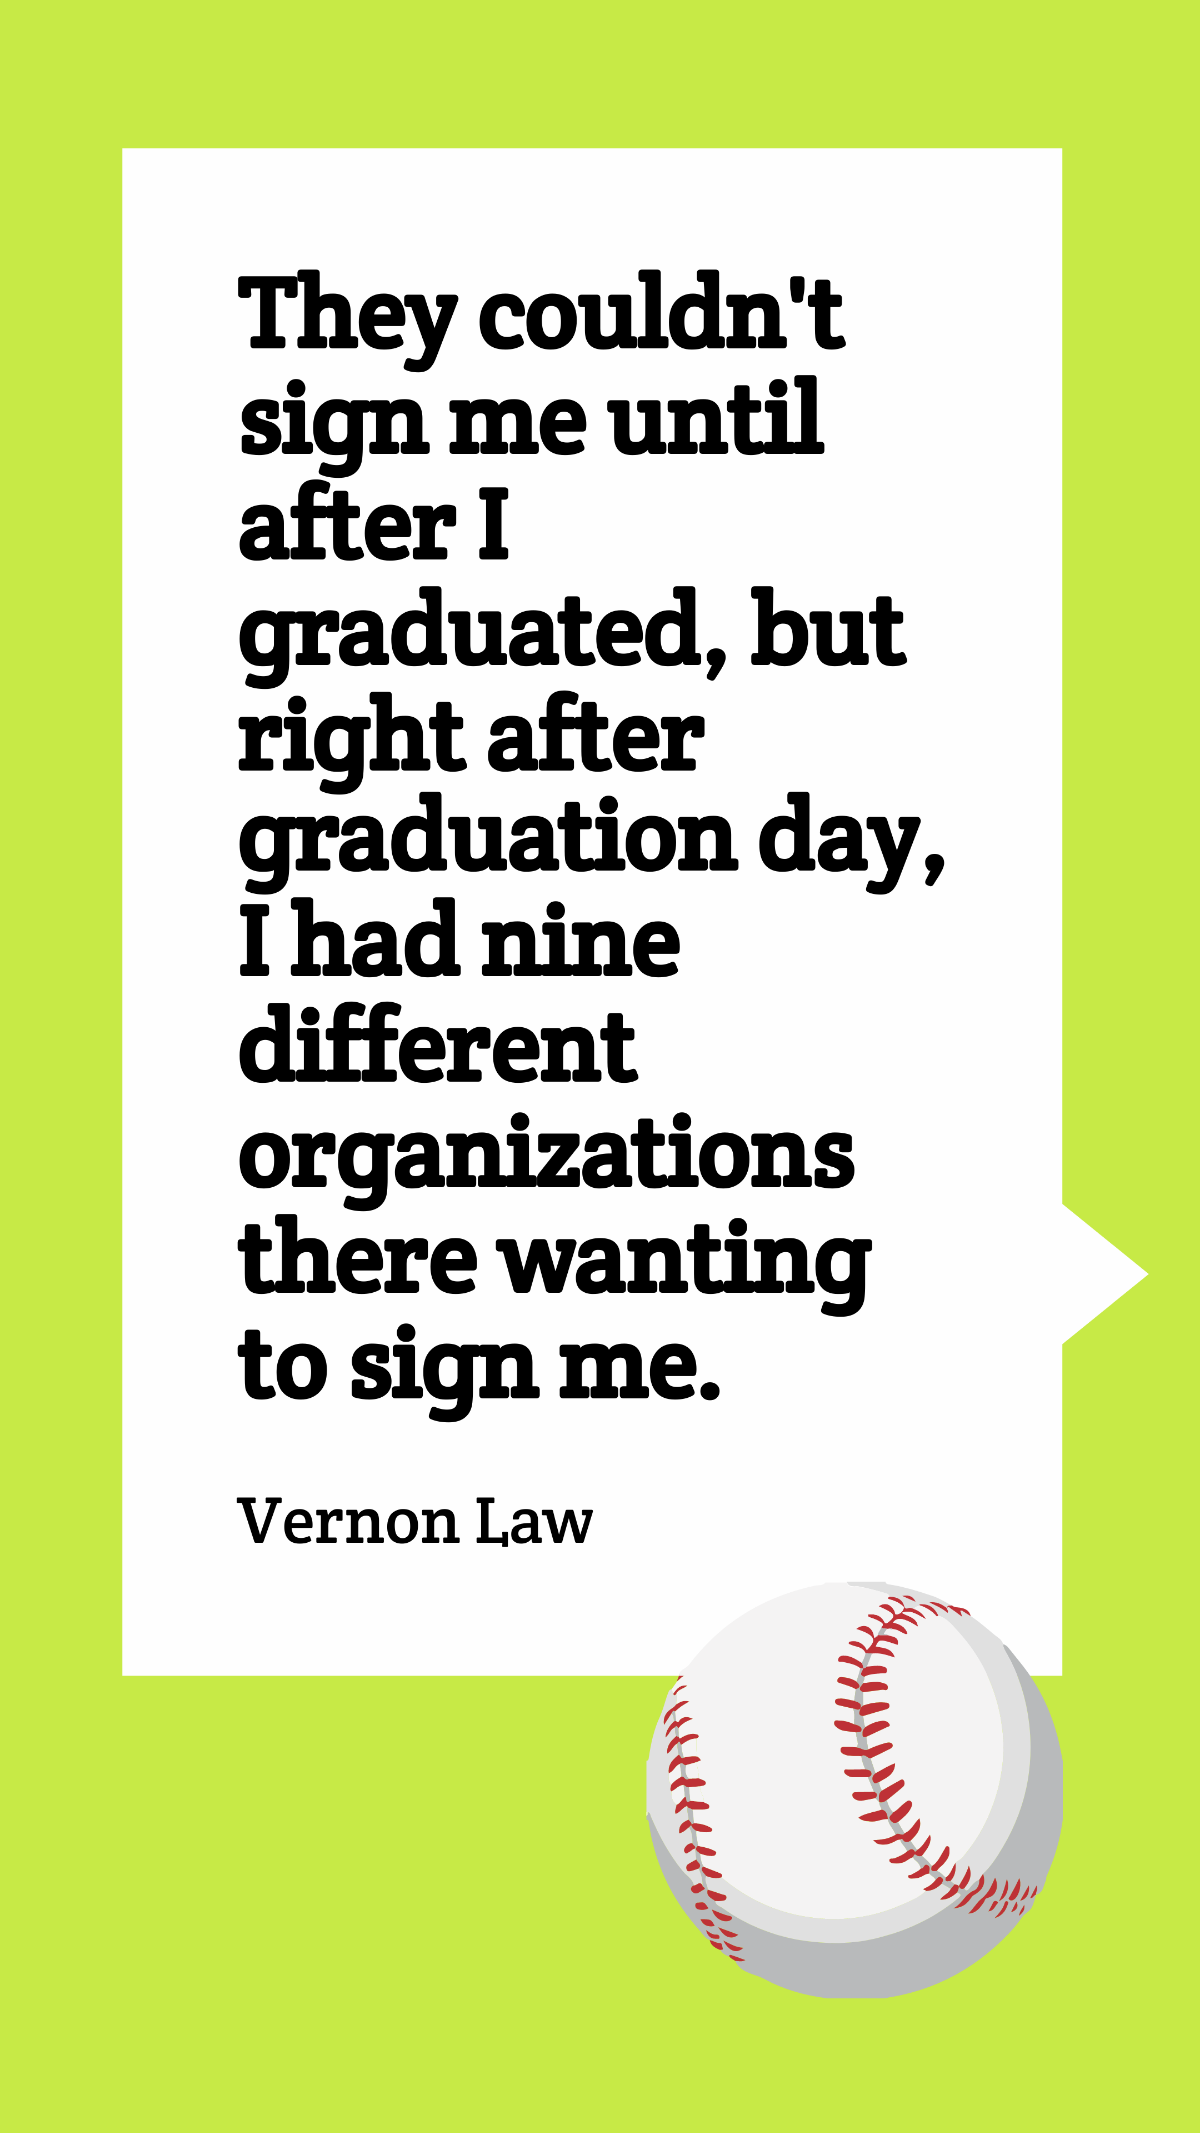 Vernon Law - They couldn't sign me until after I graduated, but right after graduation day, I had nine different organizations there wanting to sign me. Template